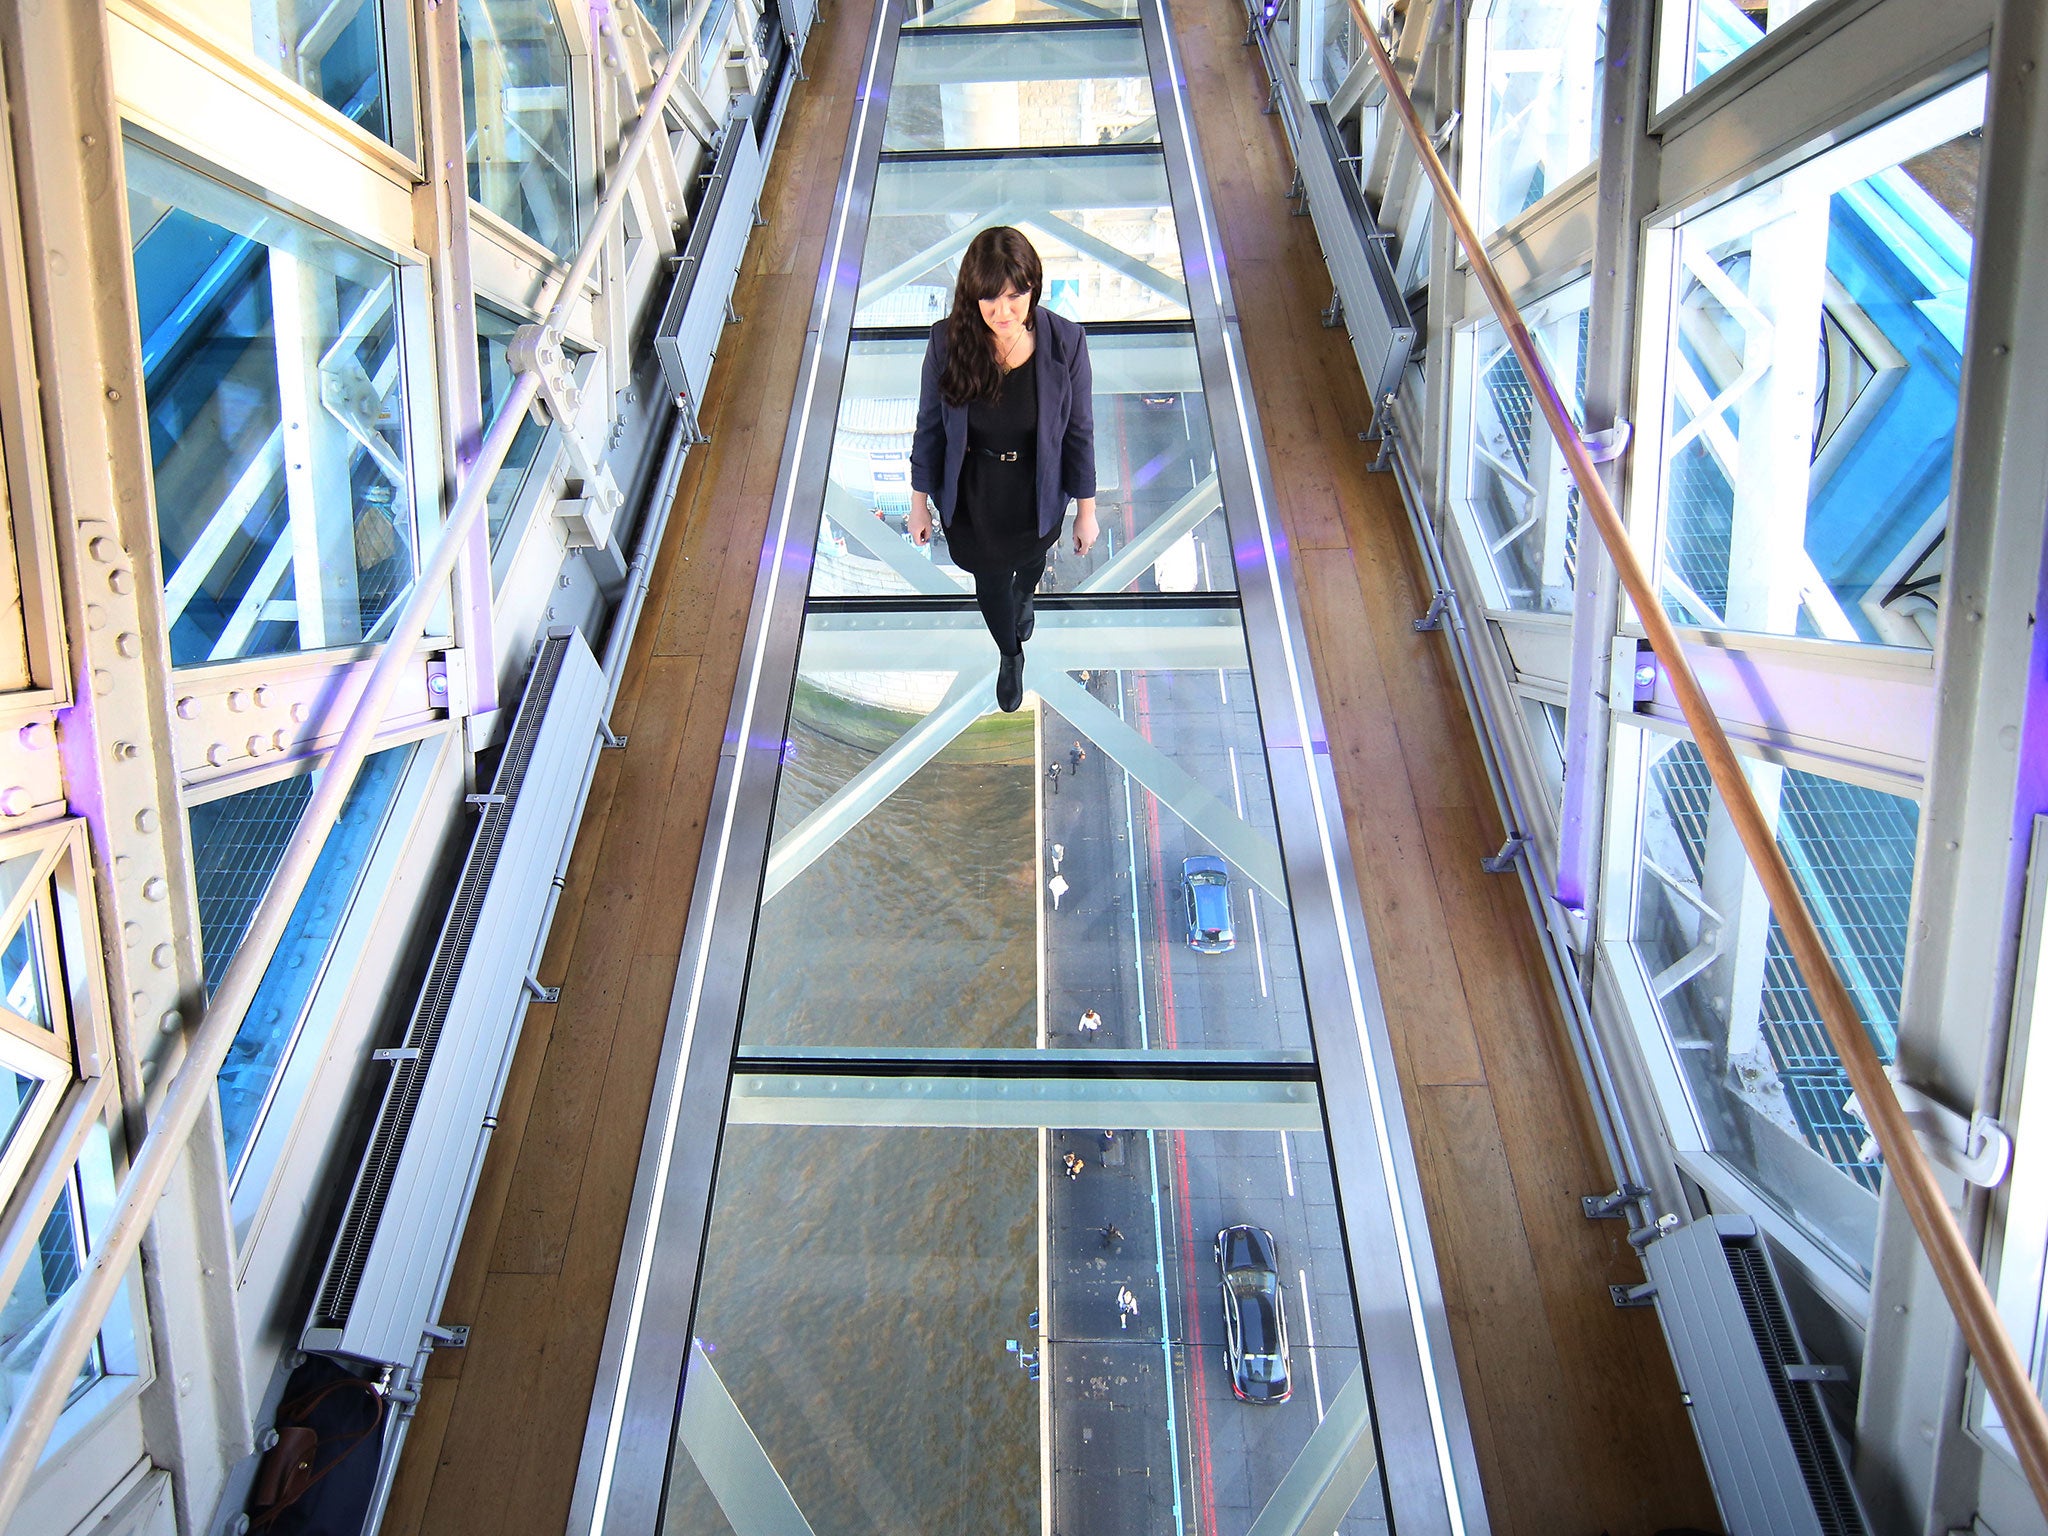 A visitor crosses Tower Bridge's new glass walkway on November 10, 2014 in London, England. Unveiled today the glass floor panels along the bridge's high-level walkways weigh 300 kgs each, cost £1m and will give visitors a new view over the historic bridg